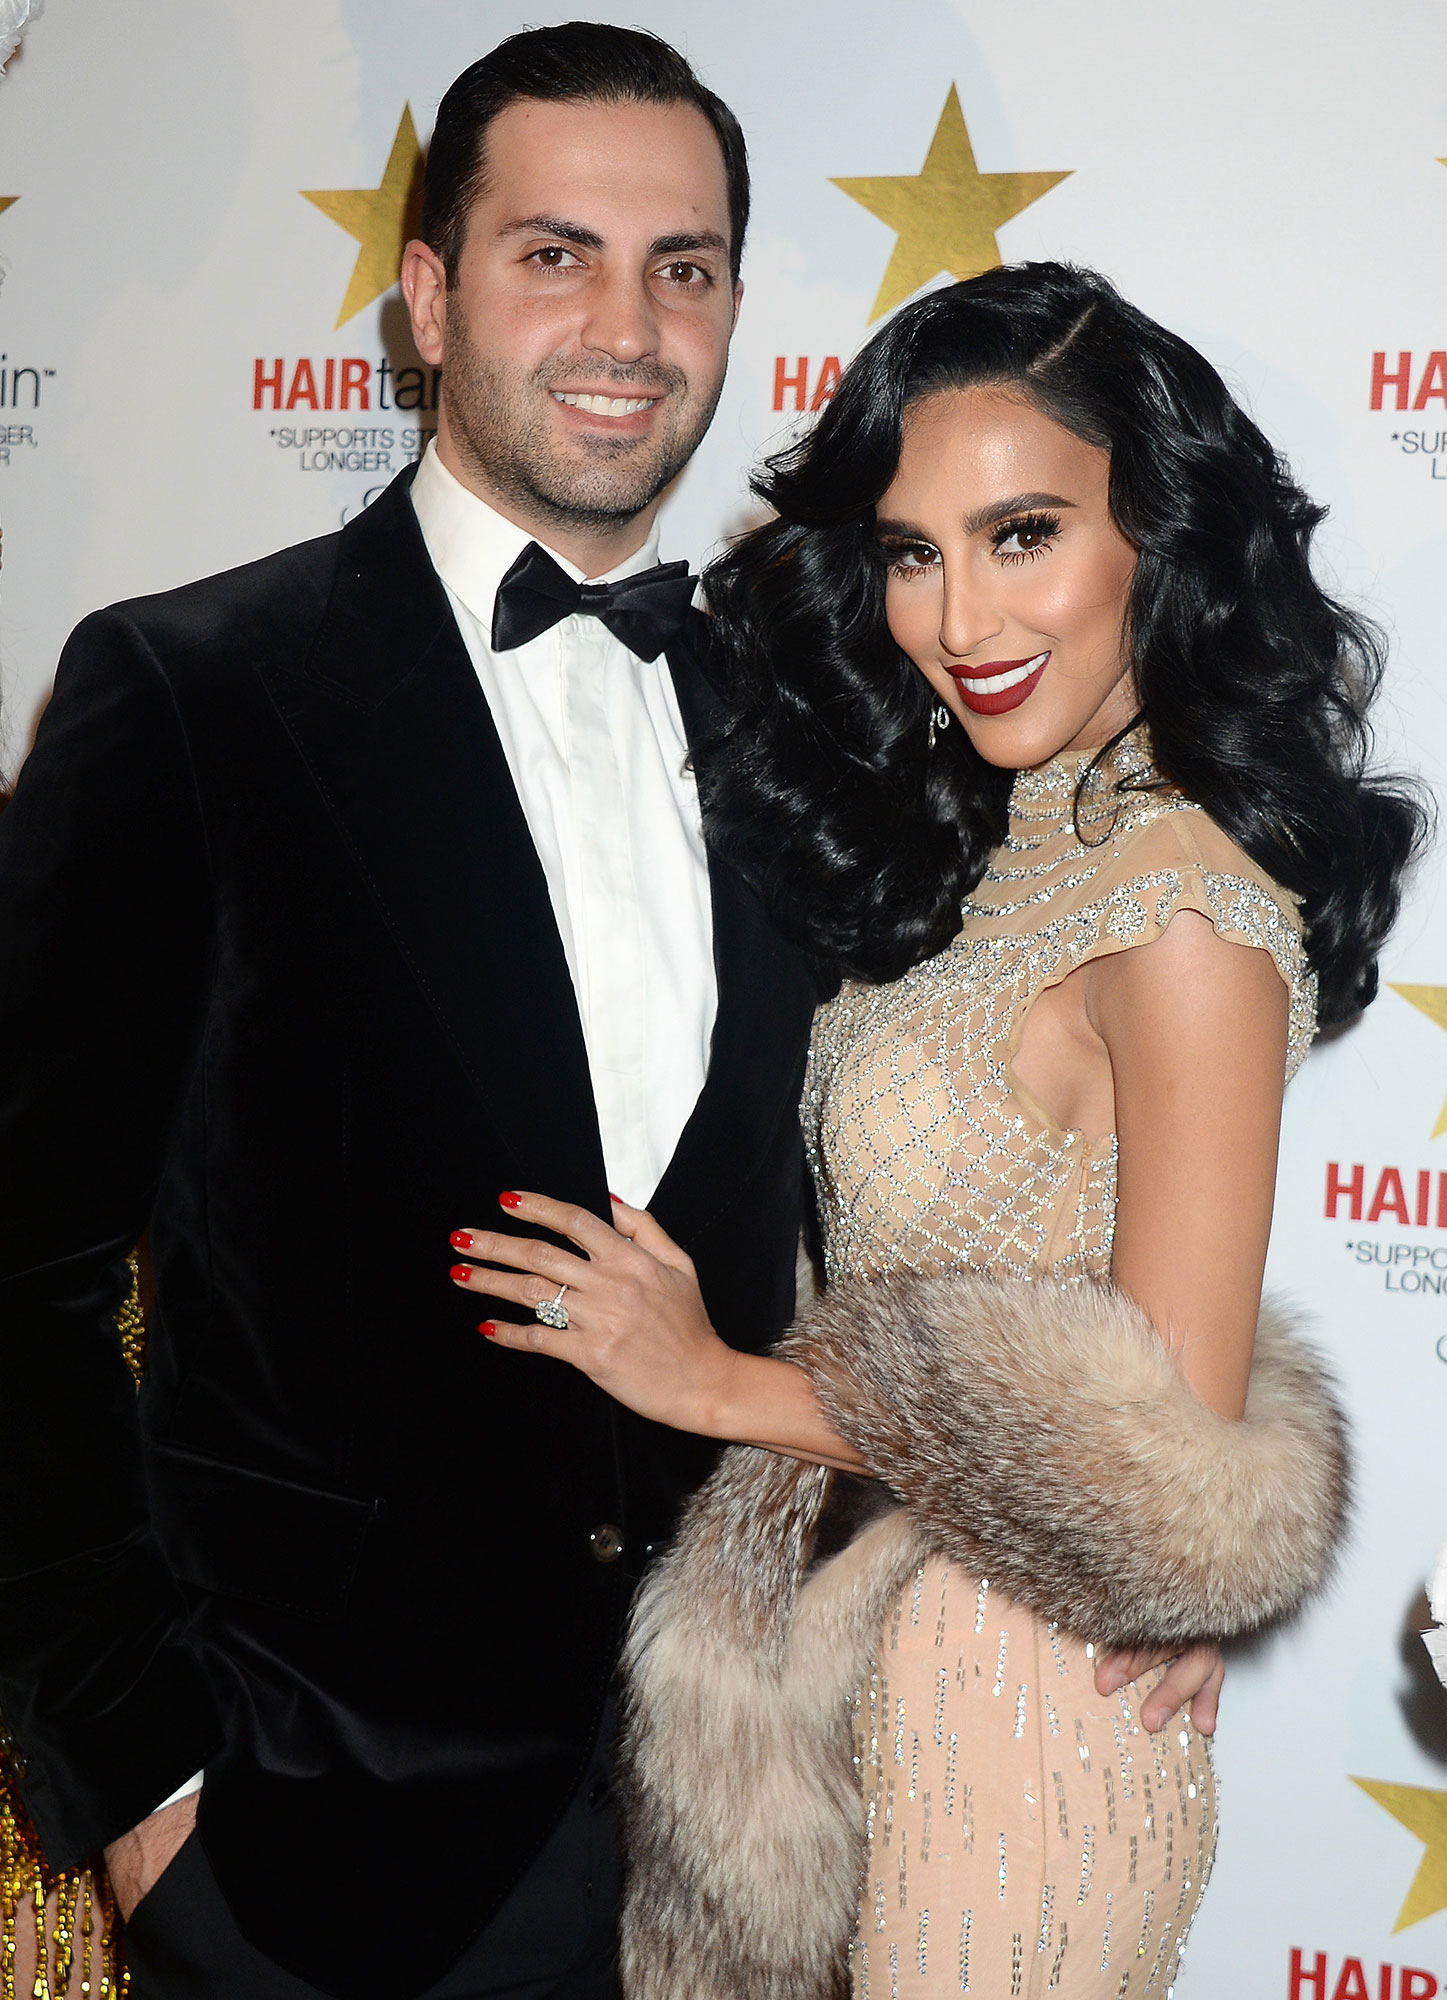 Shahs of Sunset Alum Lilly Ghalichi Is Pregnant, Expecting 2nd Child With Husband Dara Mir